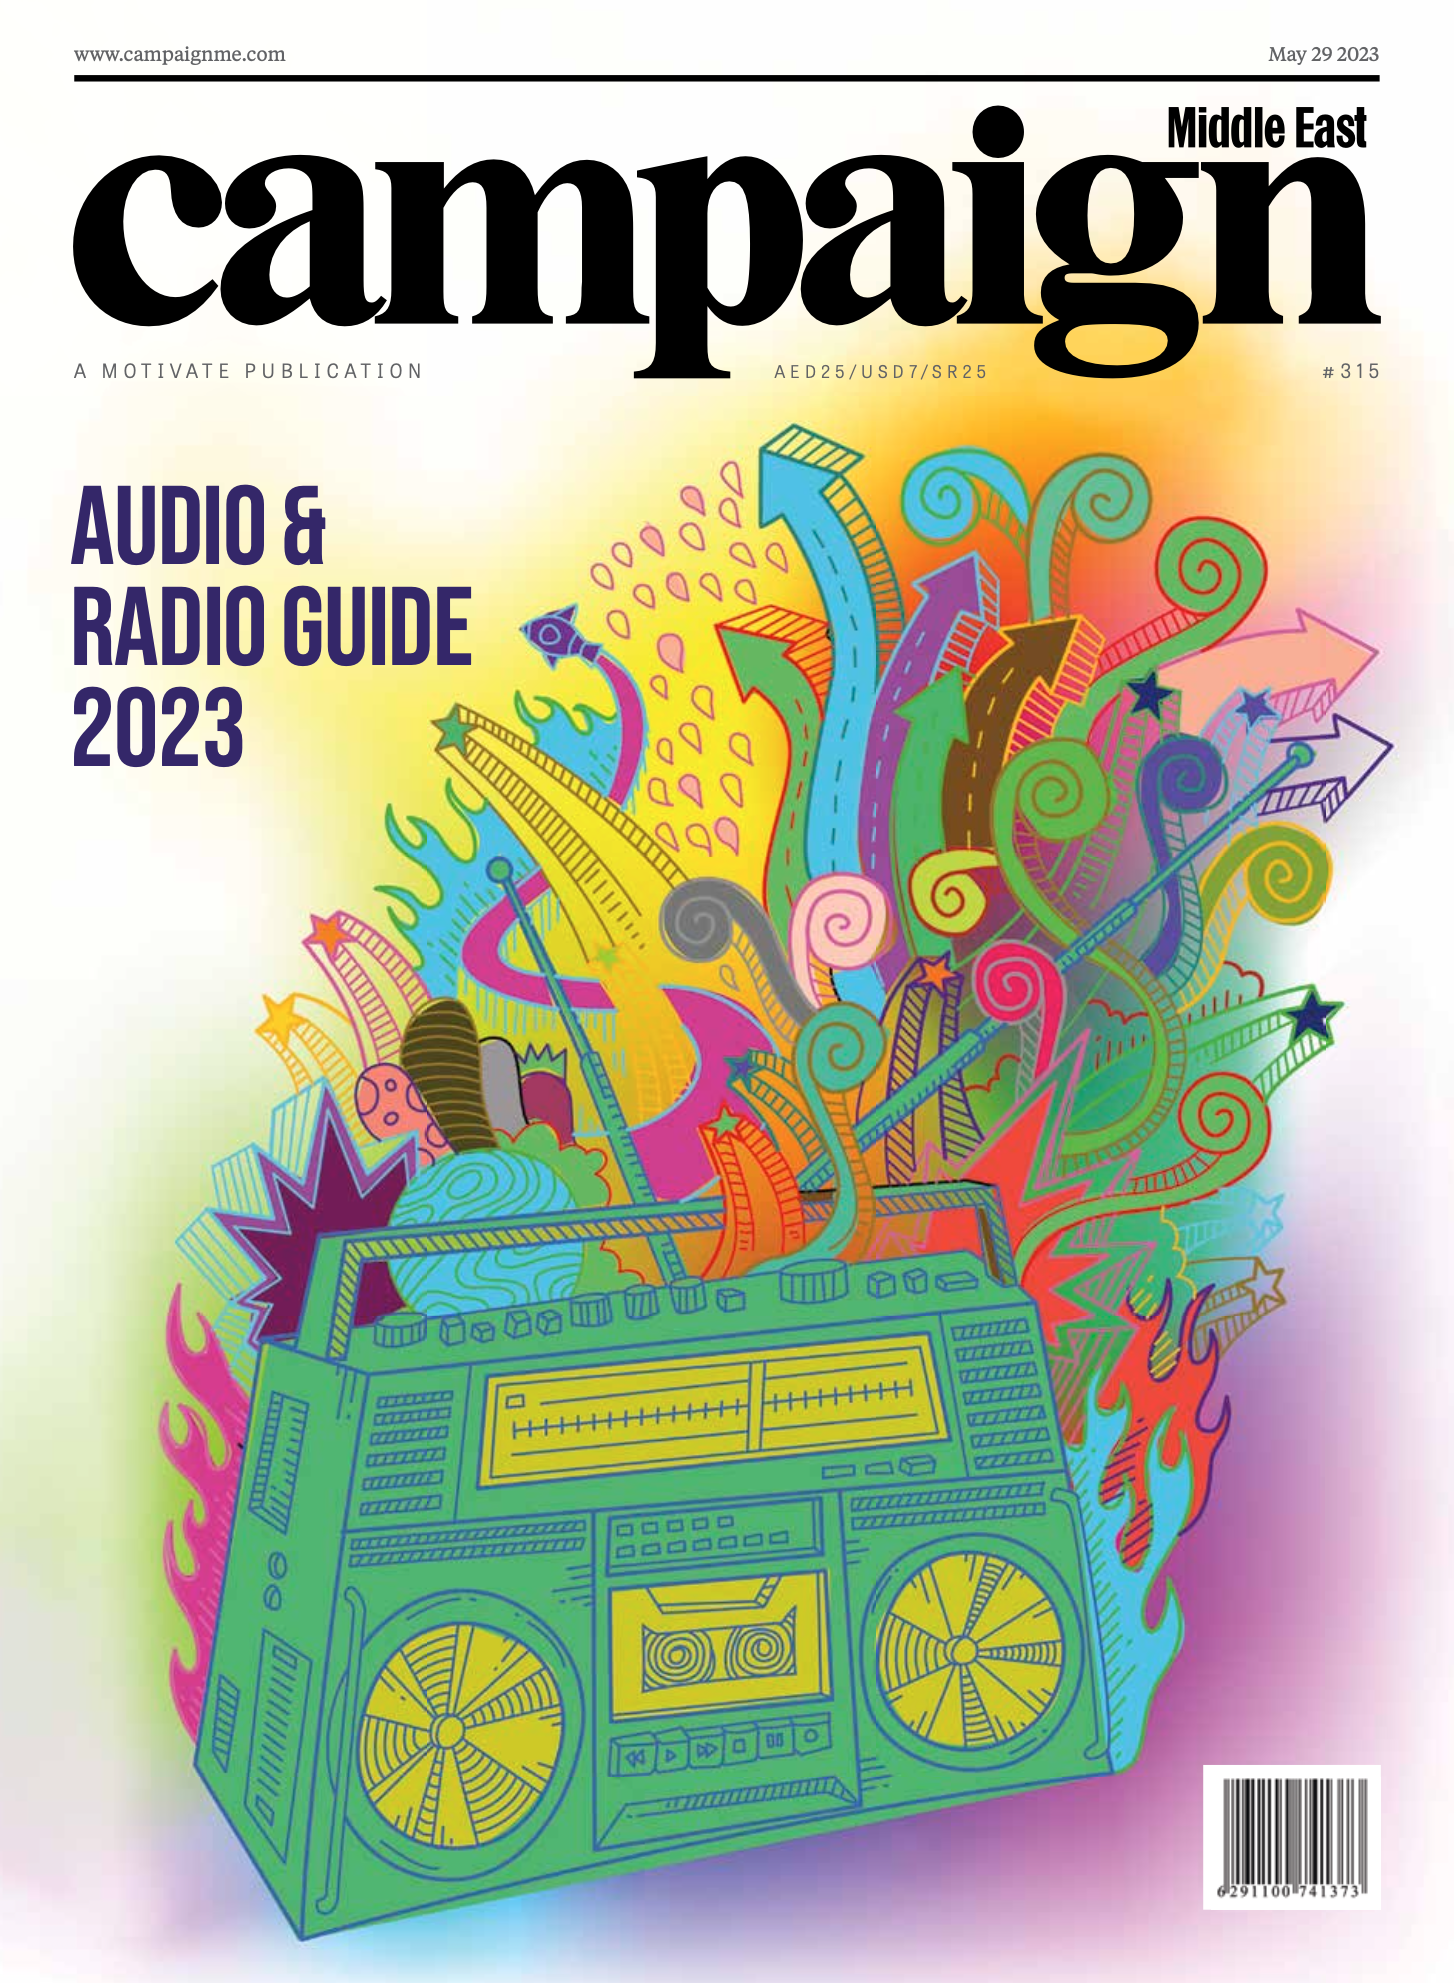 WithFeeling’s Feature in Campaign Magazine’s Audio and Radio Guide 2023